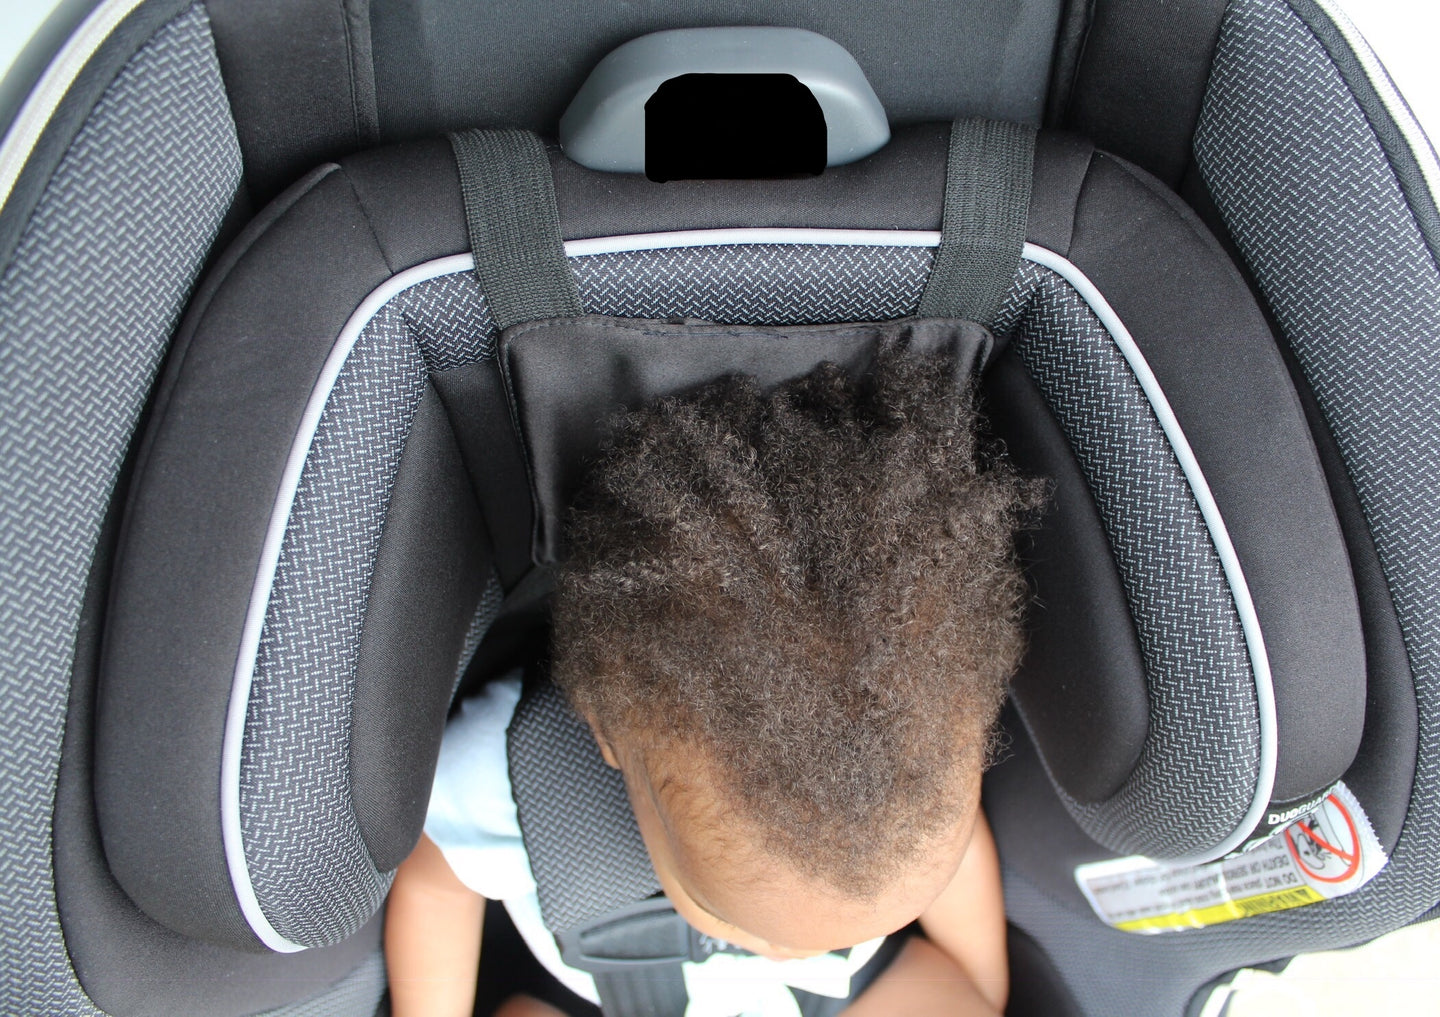 Sleadrest™ (Satin-lined headrest) installed on a child's car seat to prevent dry hair and hair breakage.